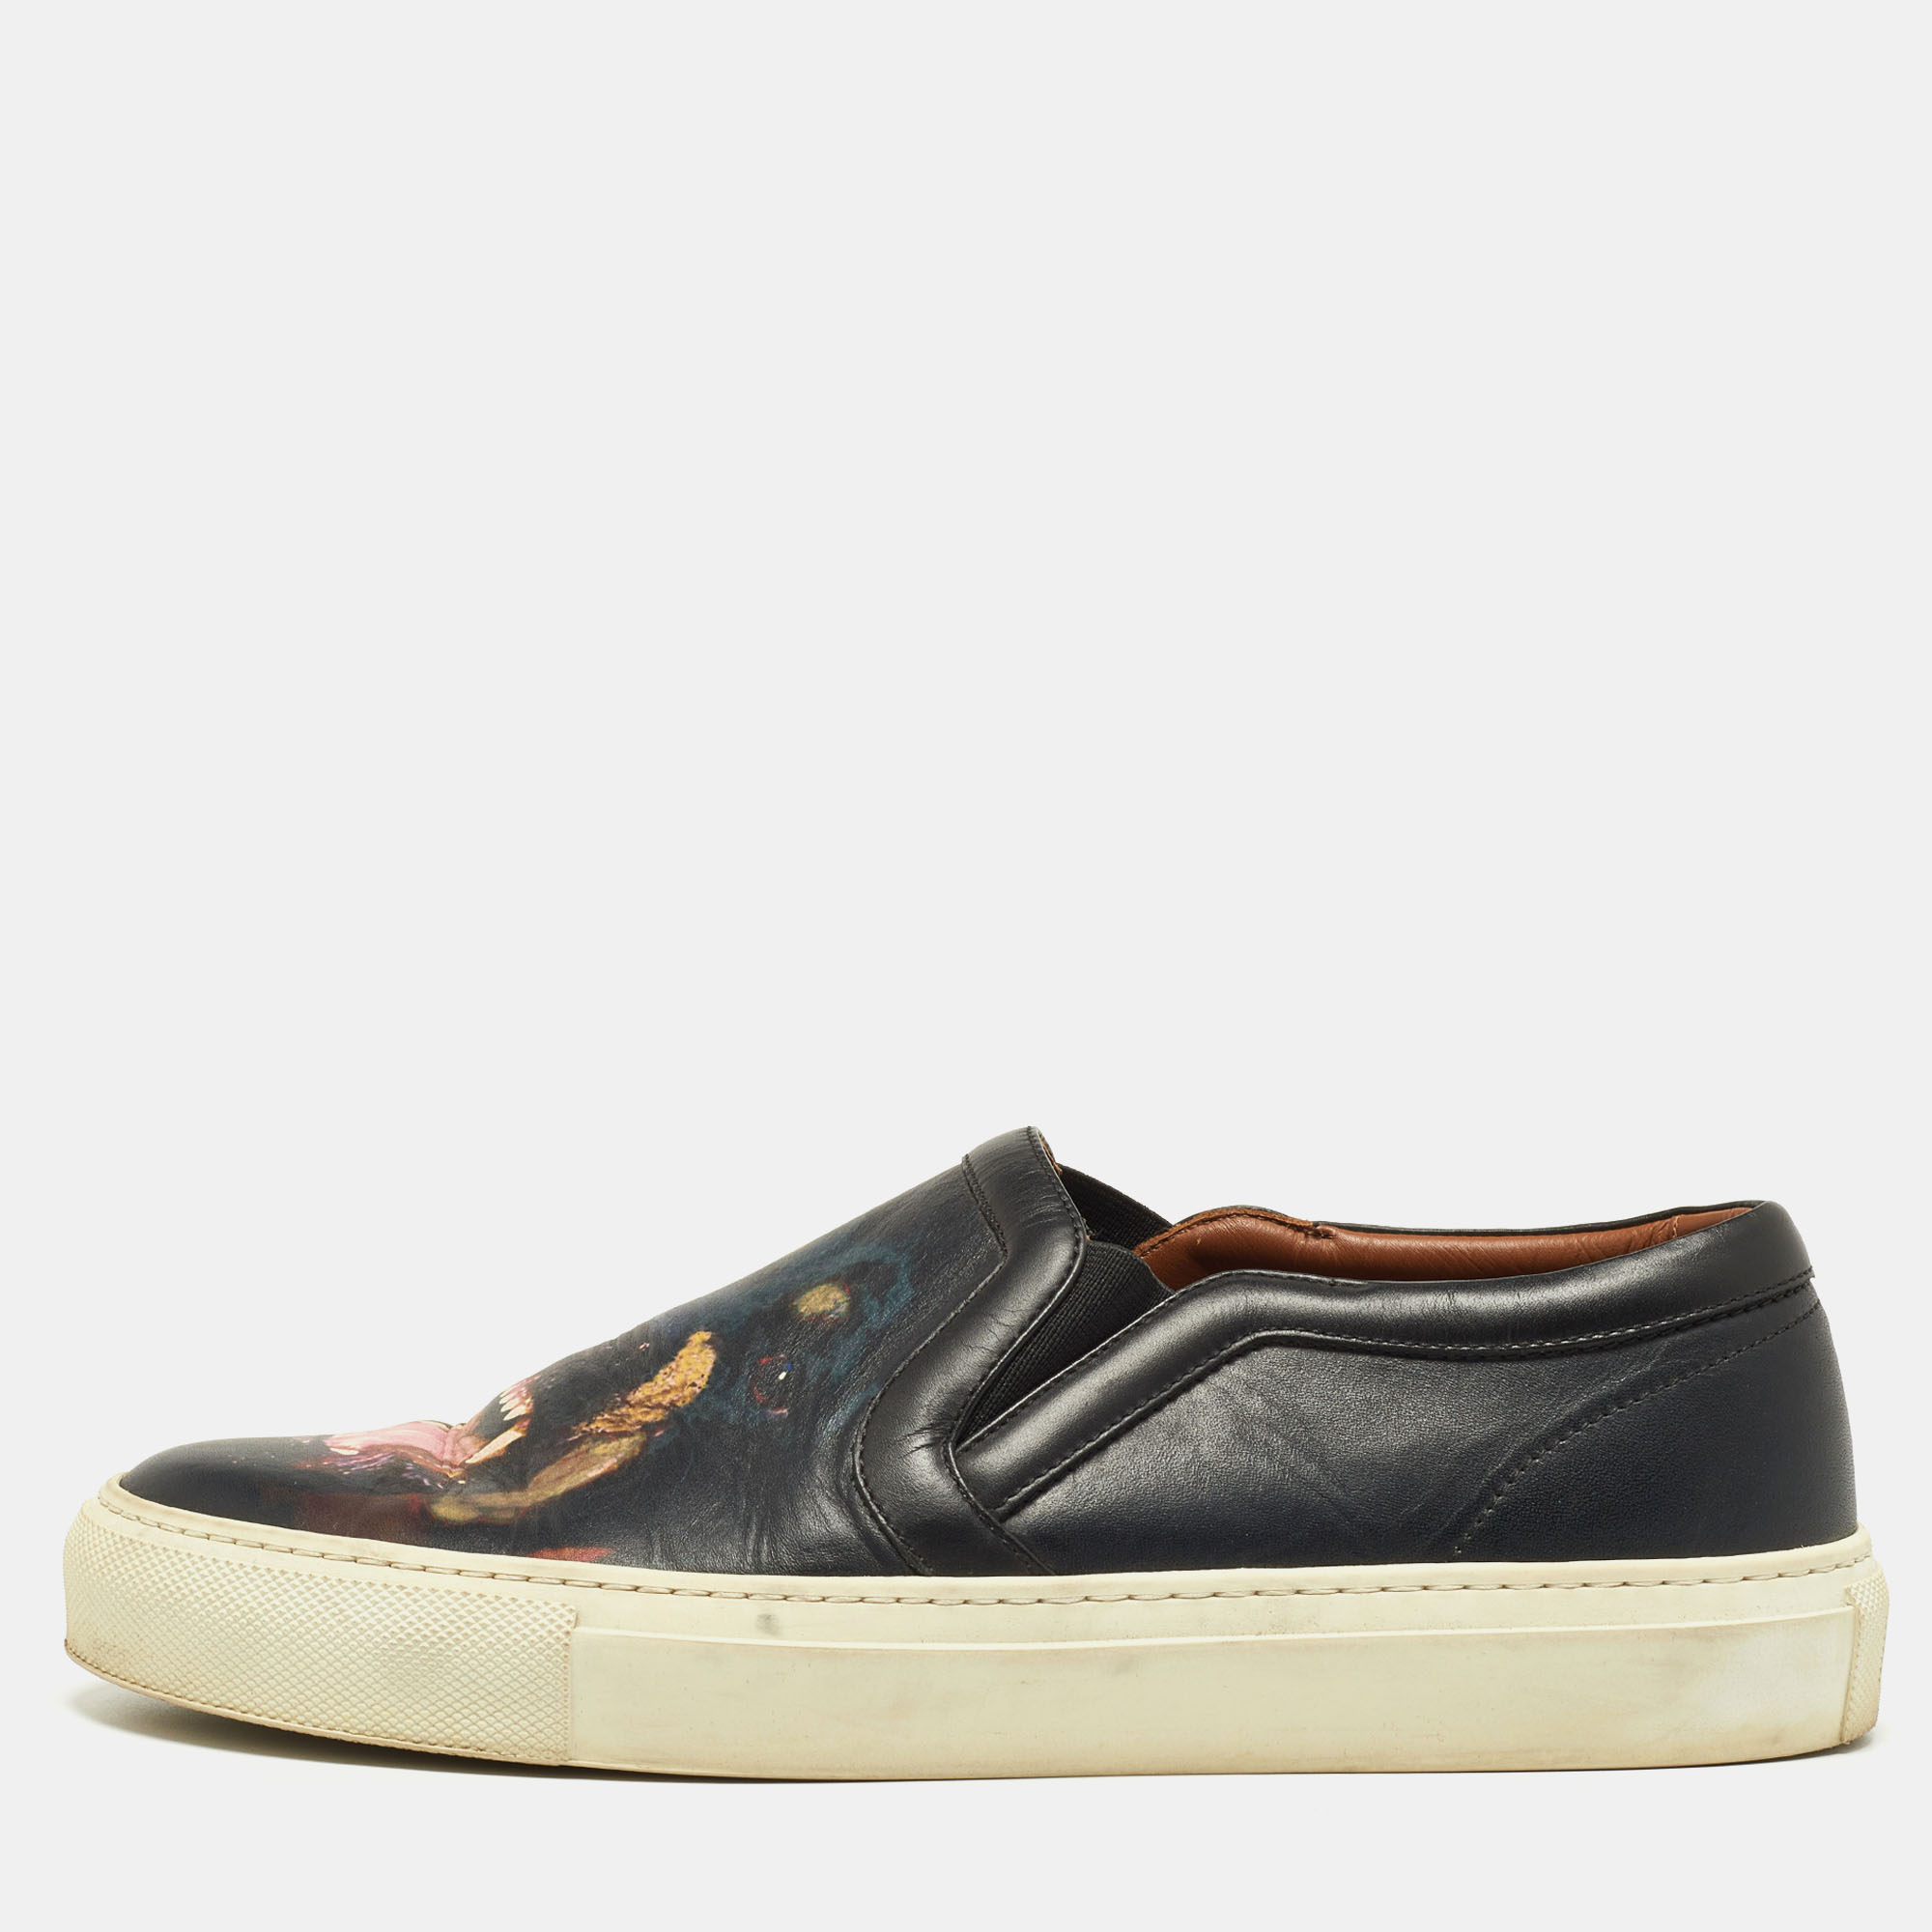 Givenchy Black Leather Rottweiler Slip On Sneakers Size 39